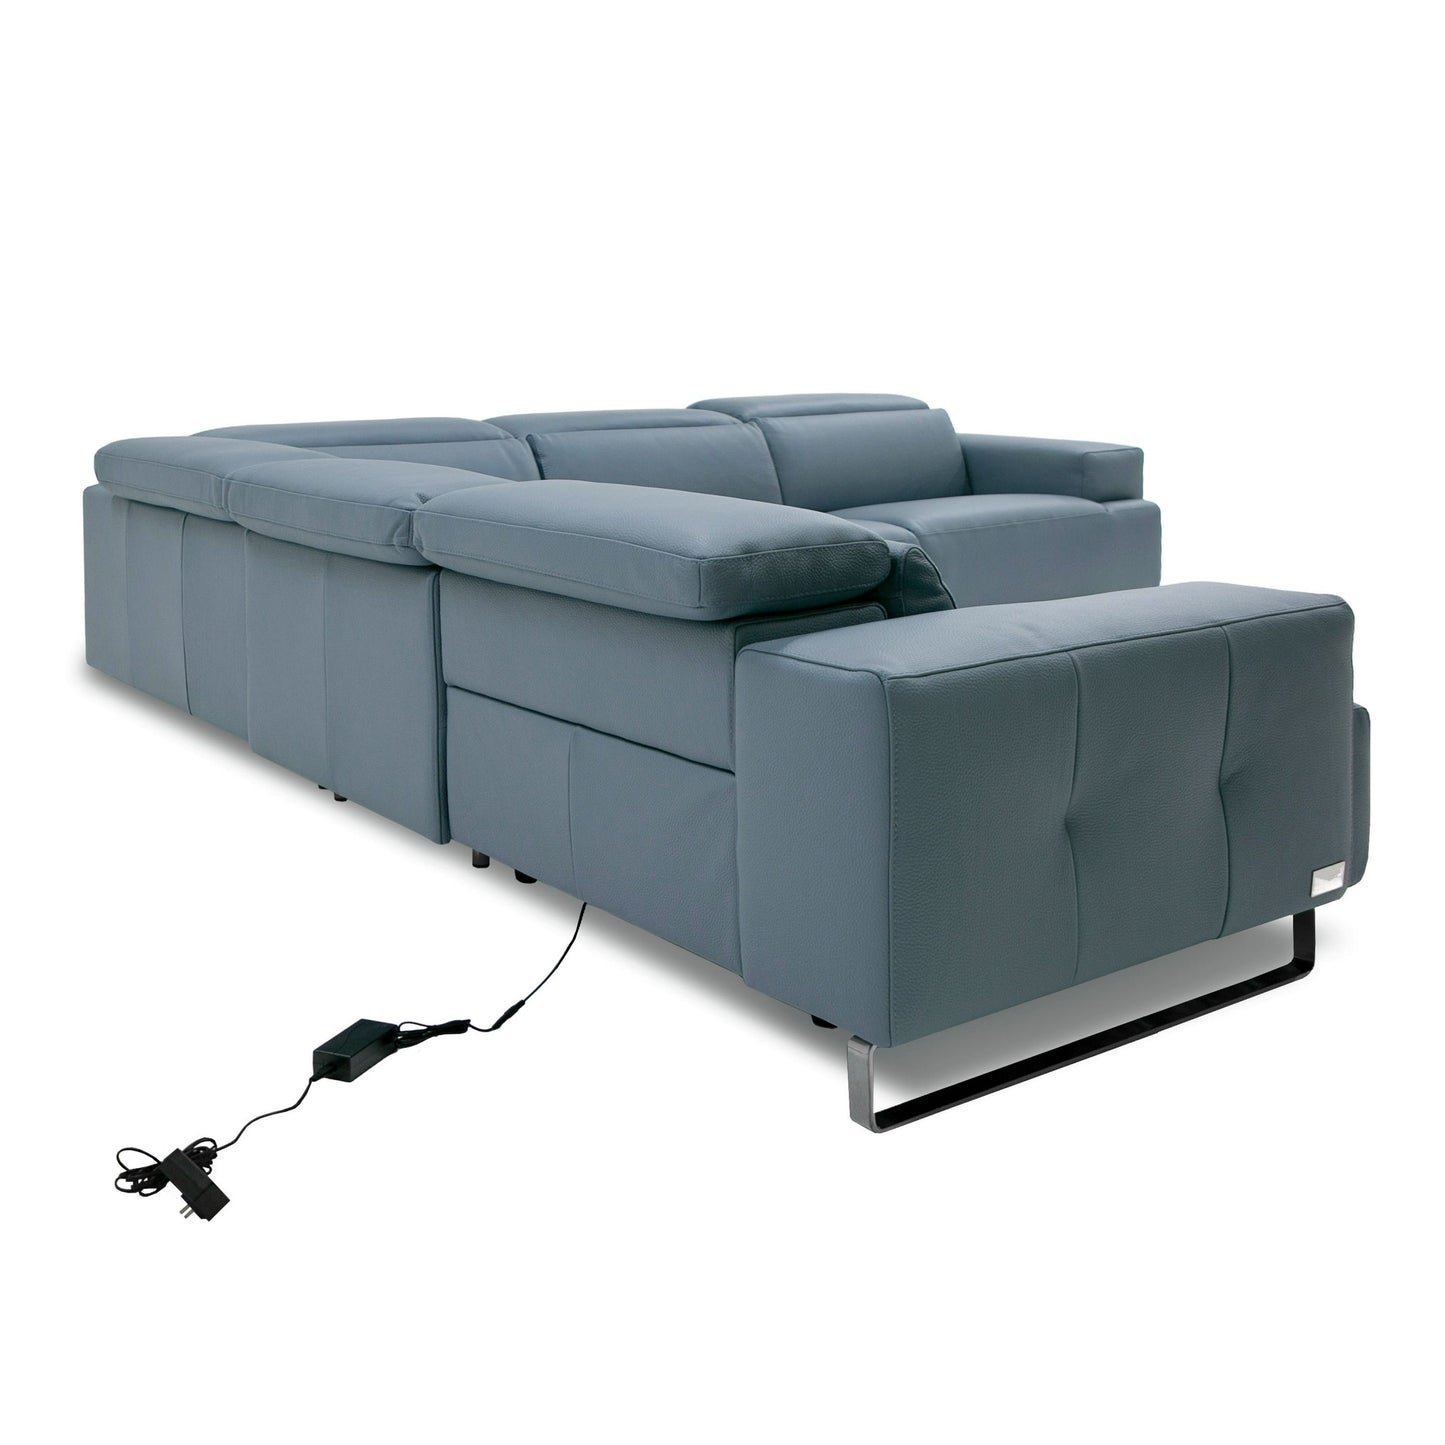 Coronelli Collezioni Sorrento - Italian Steel Blue Leather Sectional Sofa with 2 Recliners